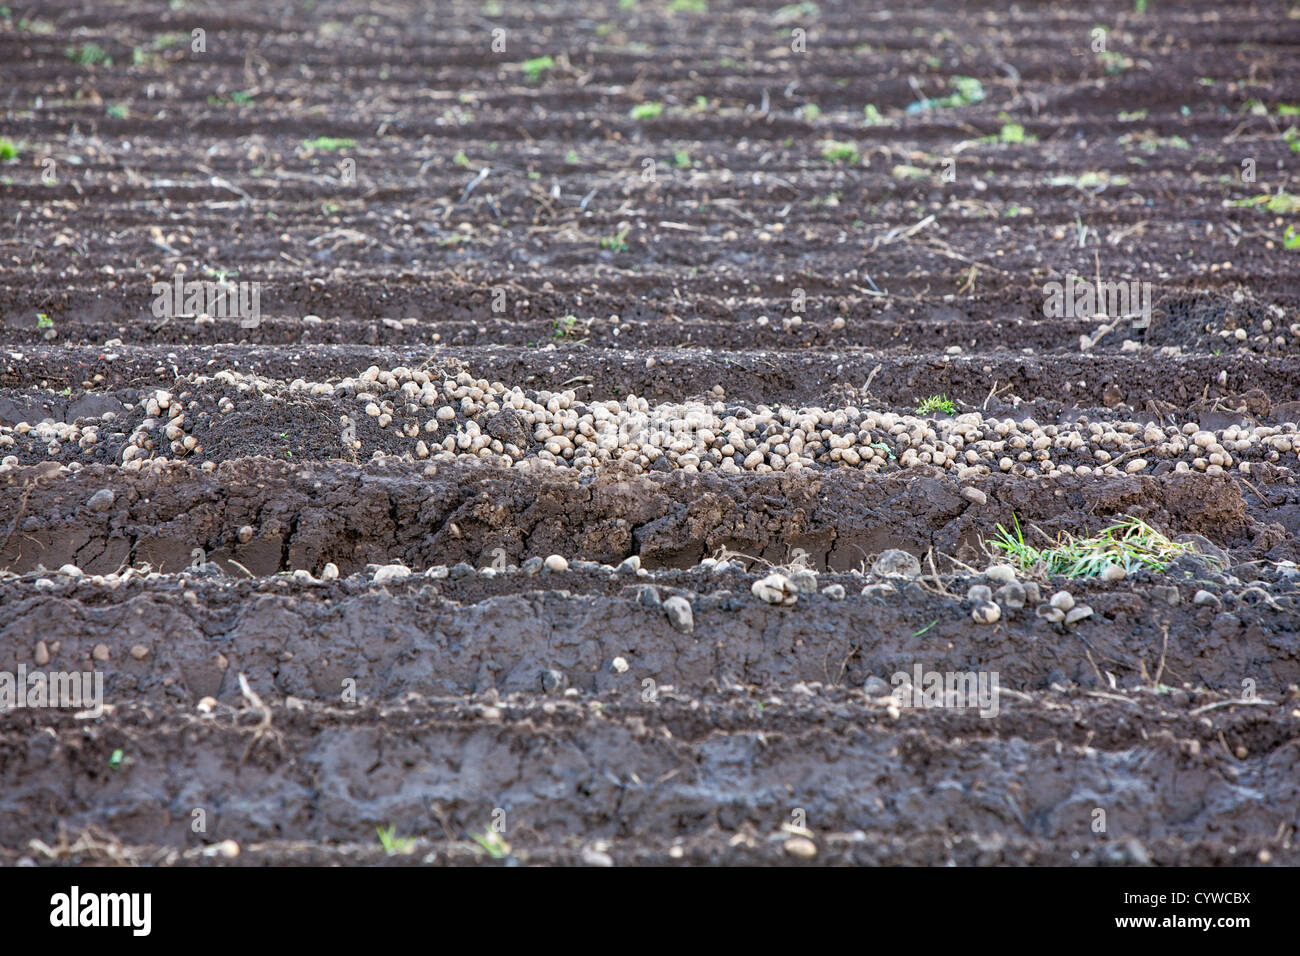 Piles of potatoes strewn across a muddy field during difficult harvesting conditions. Stock Photo